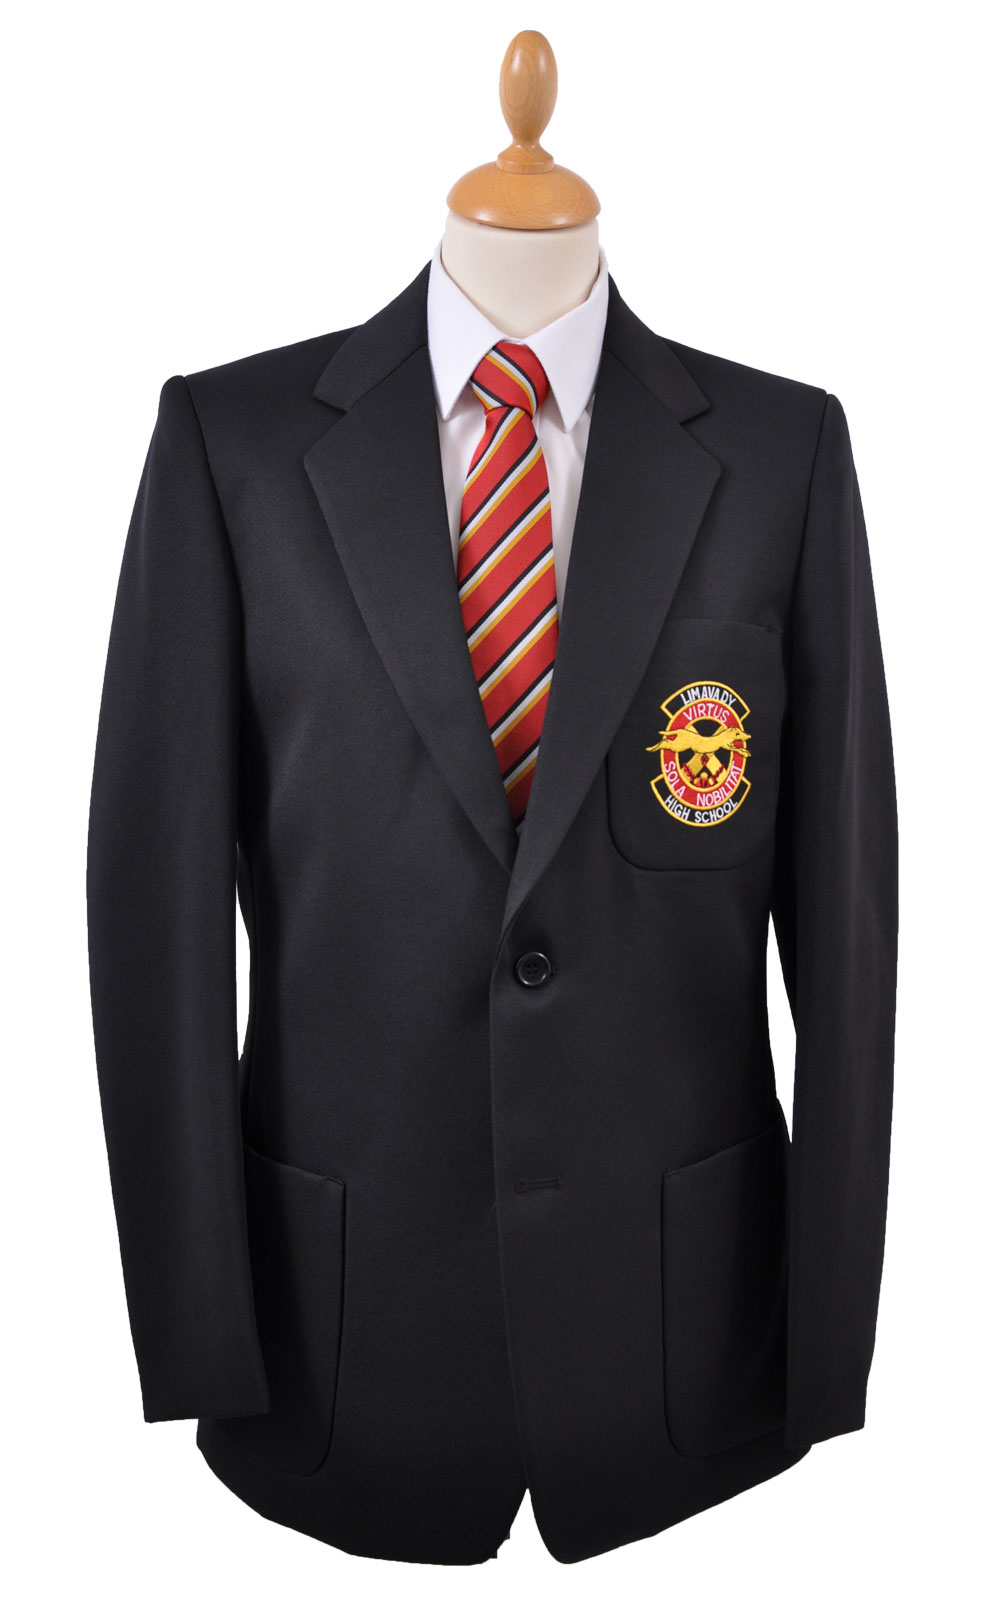 Picture of Limavady HS Boys Blazer - S&T